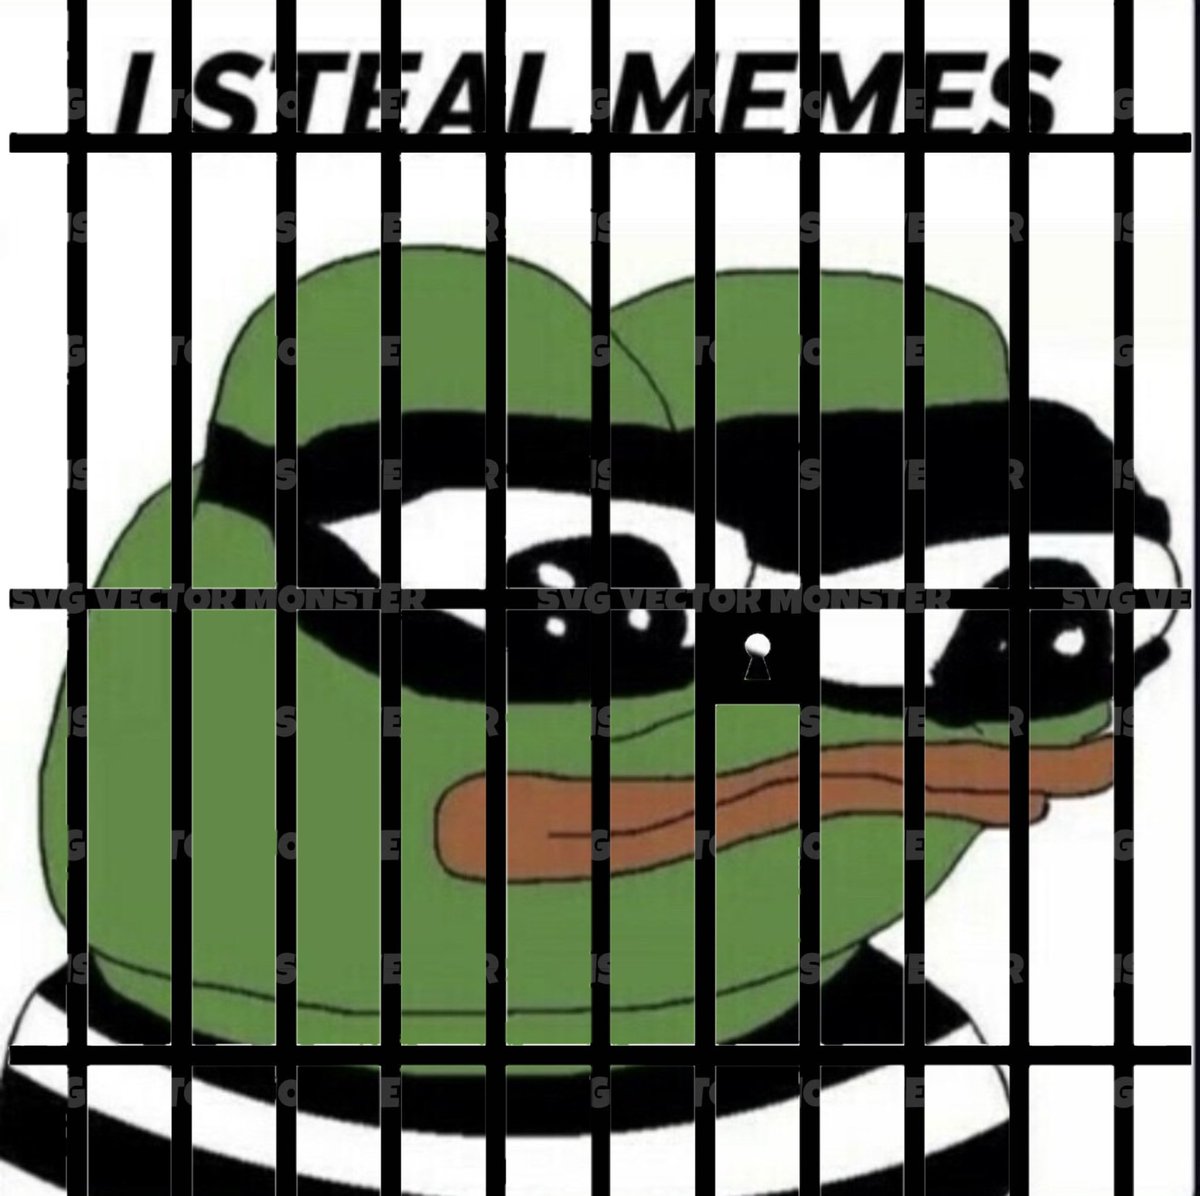 If you steal memes from another platform & post them here did it really happen?